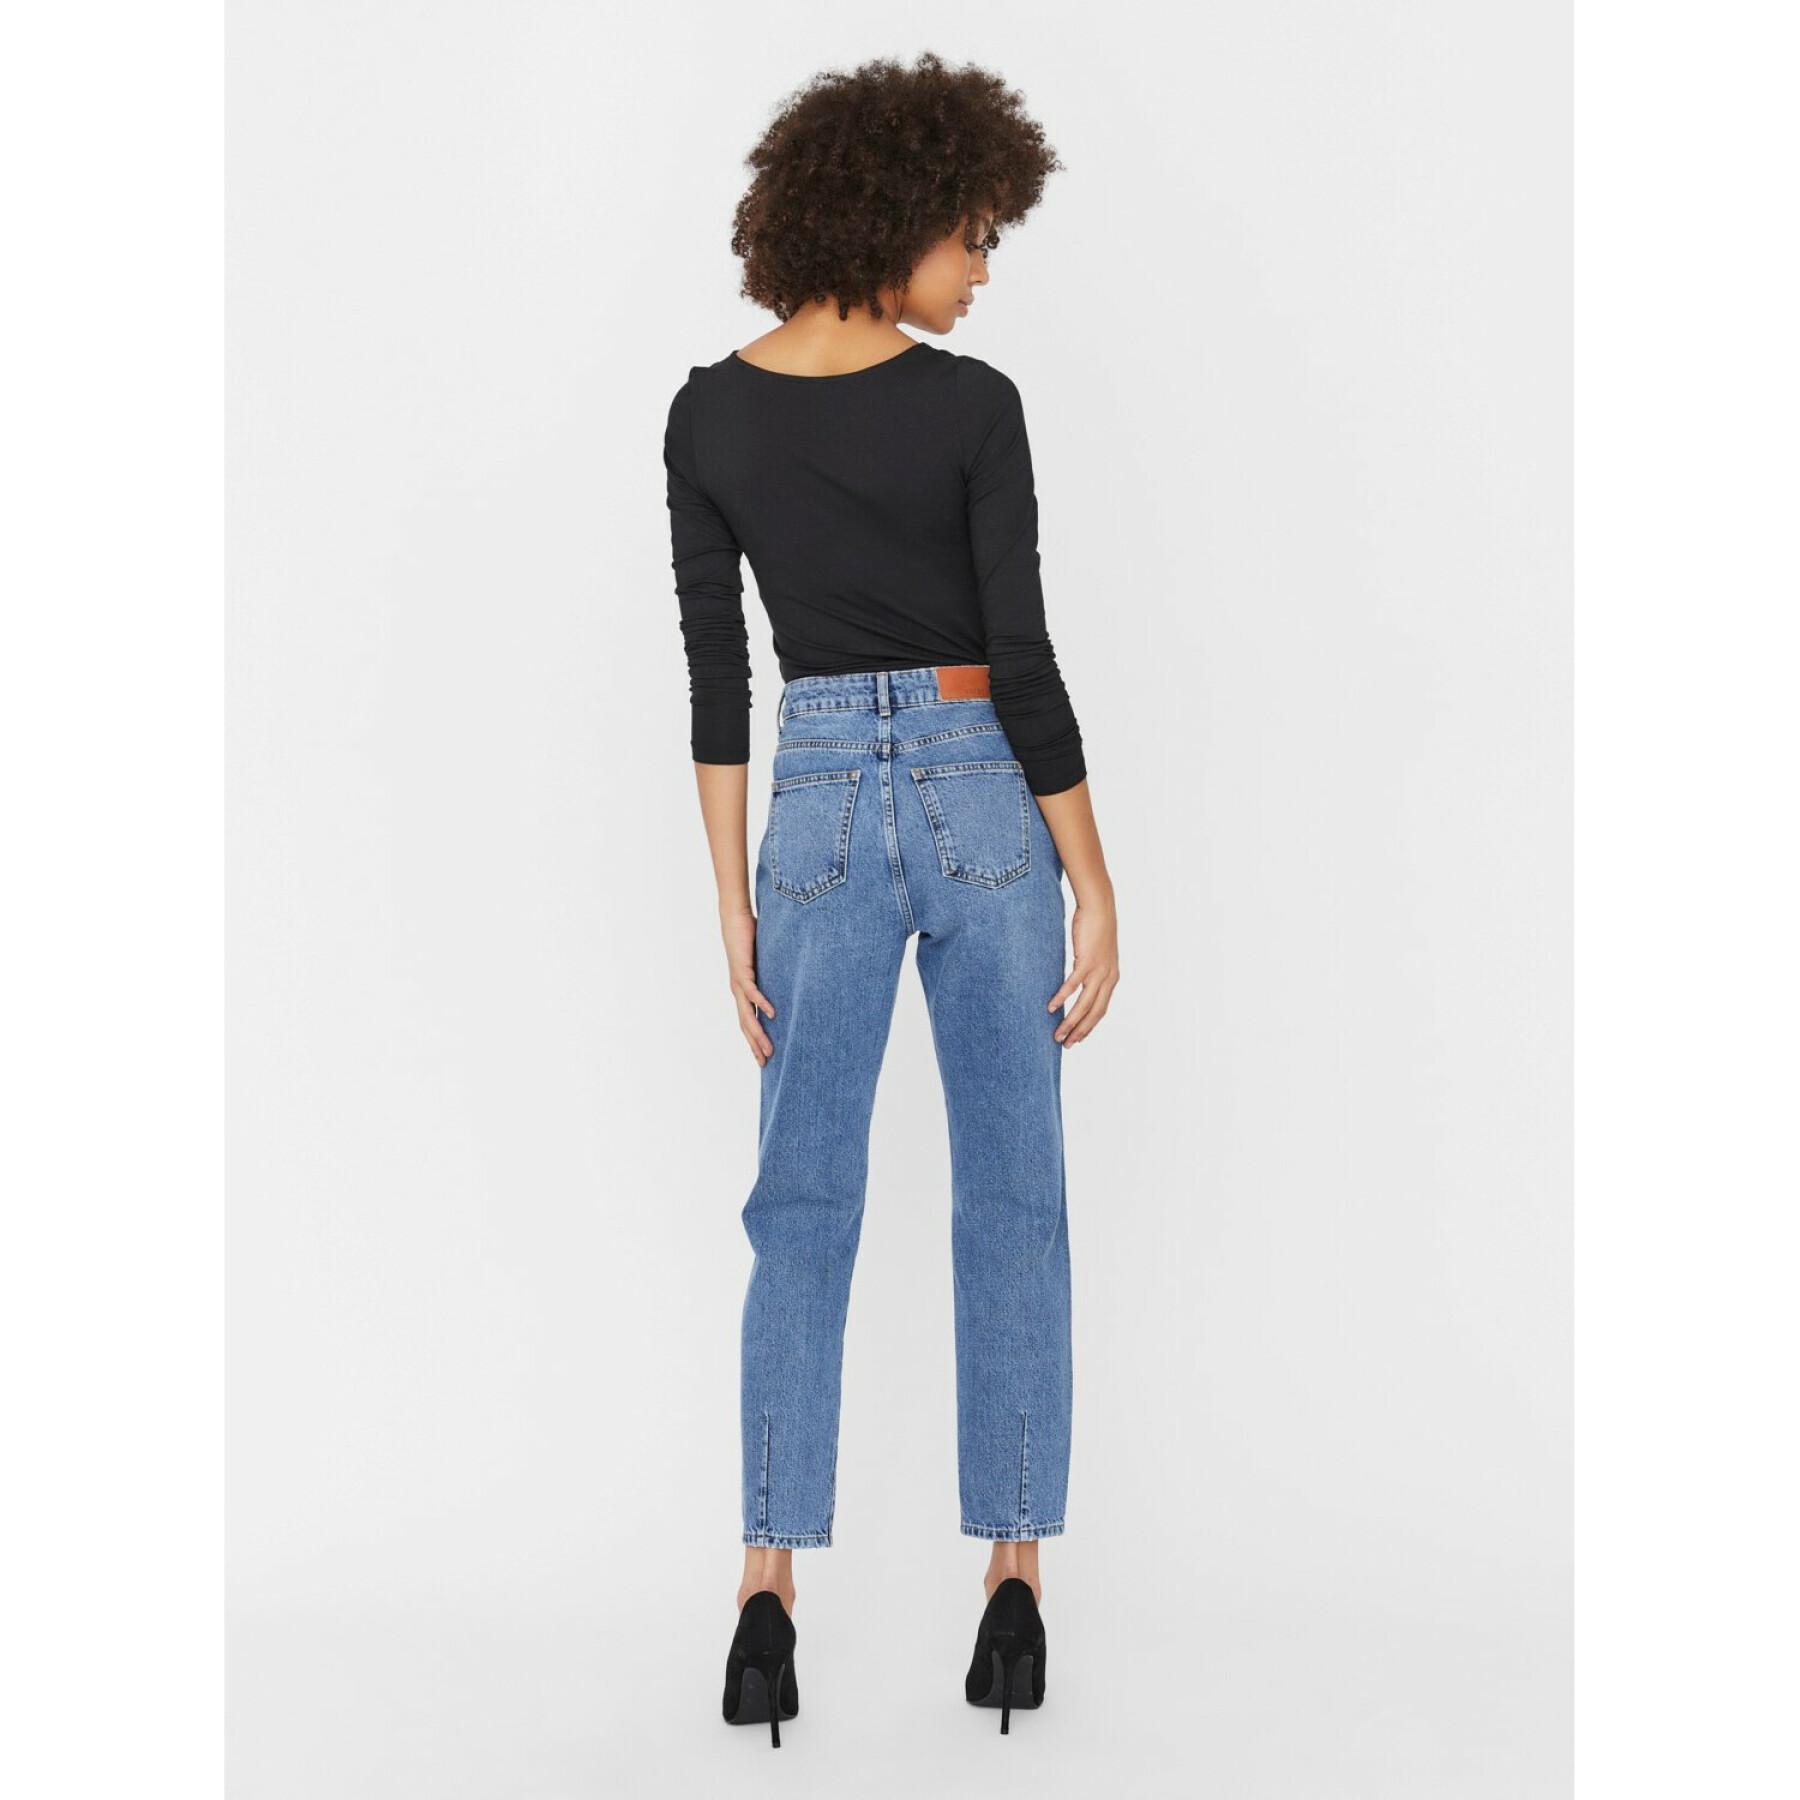 Jeans femme Noisy May nmisabel